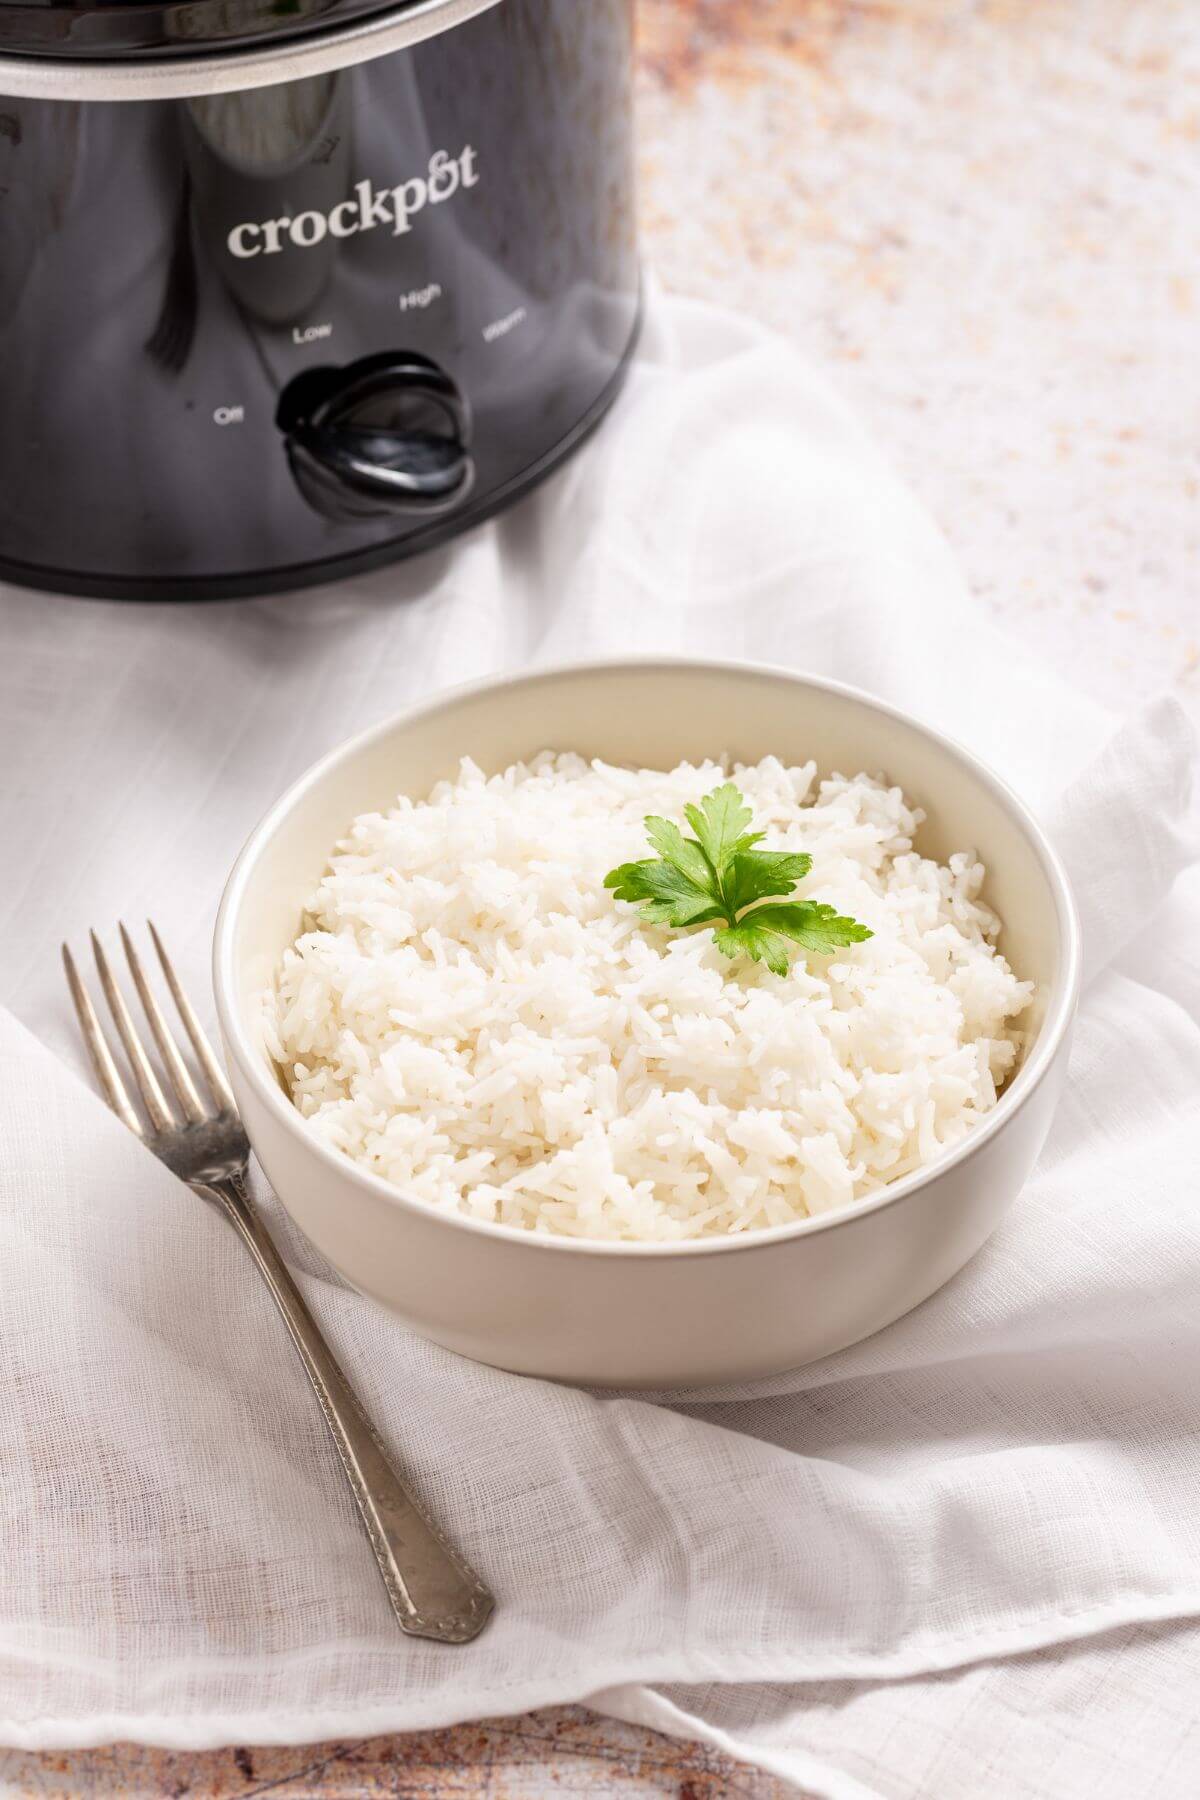 A bowl of rice in front of a crockpot.